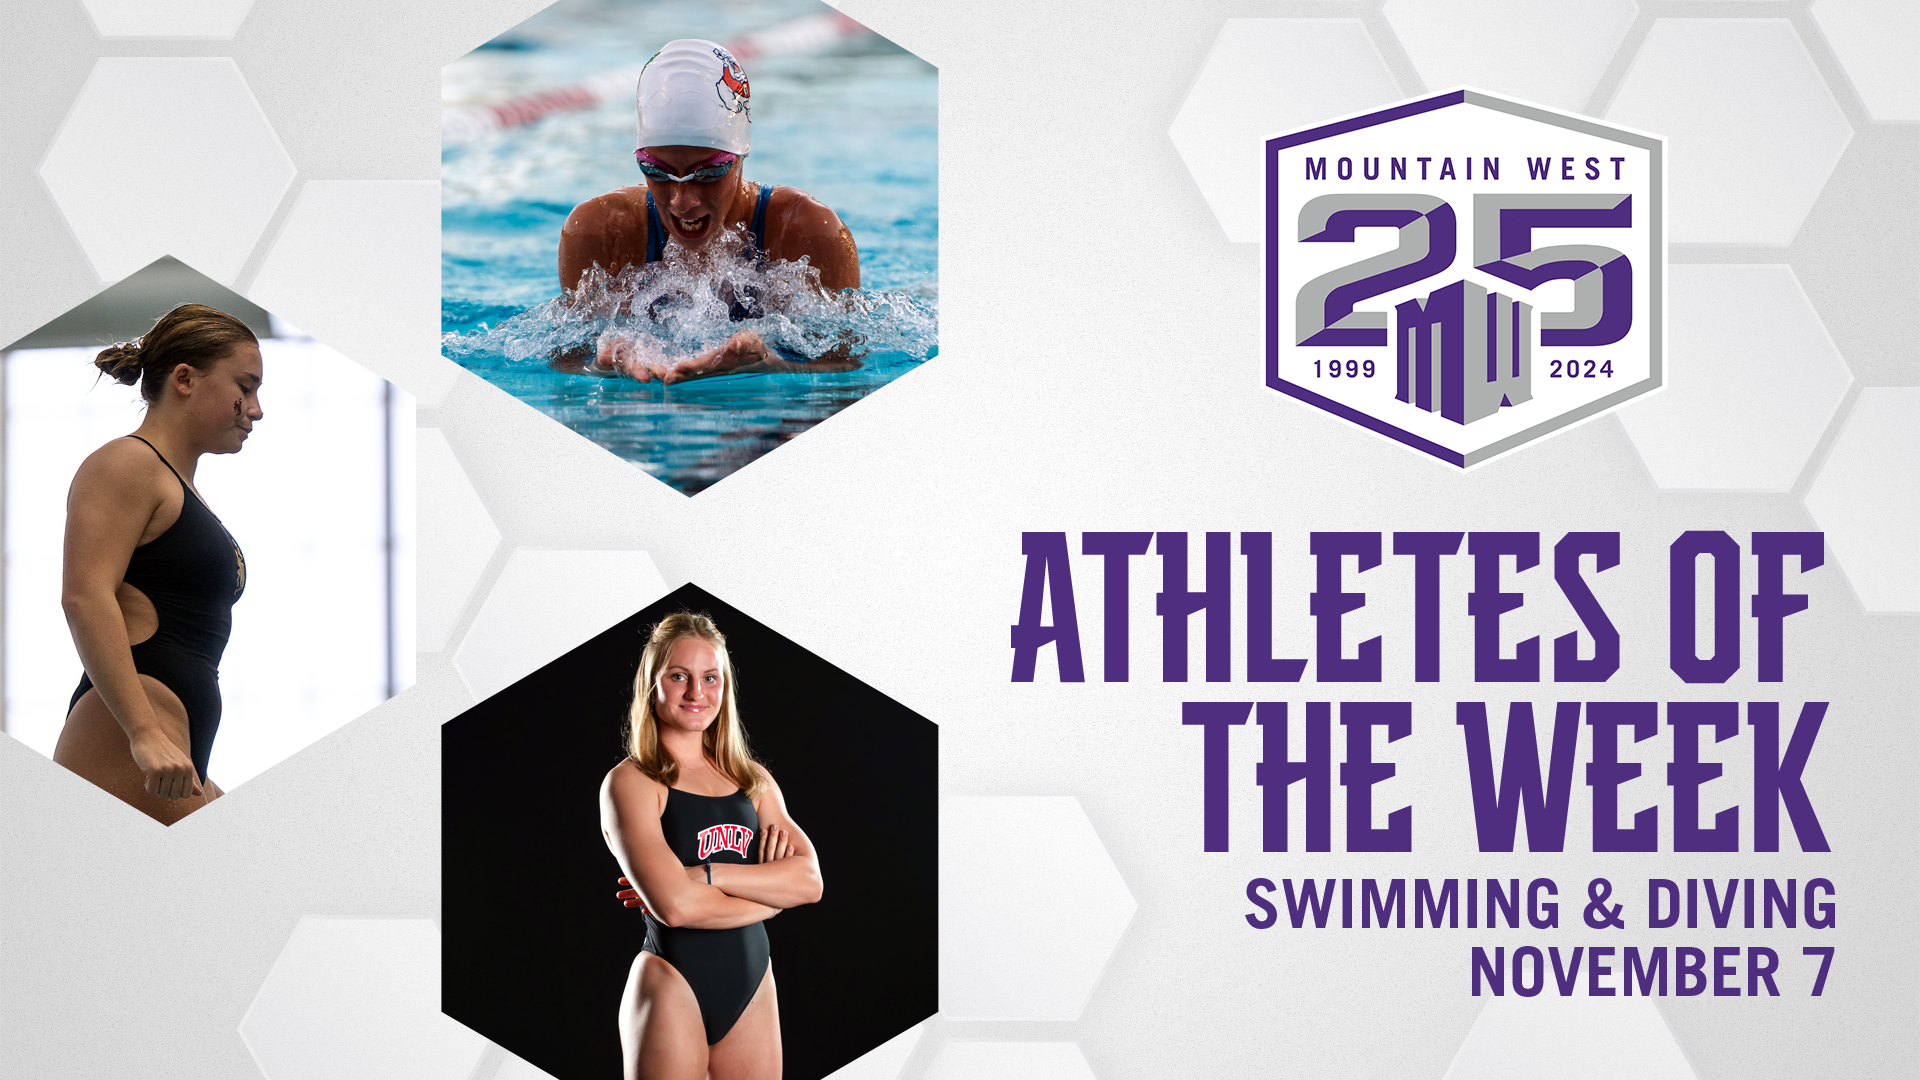 MW Swimming & Diving Athletes of the Week - Nov. 7